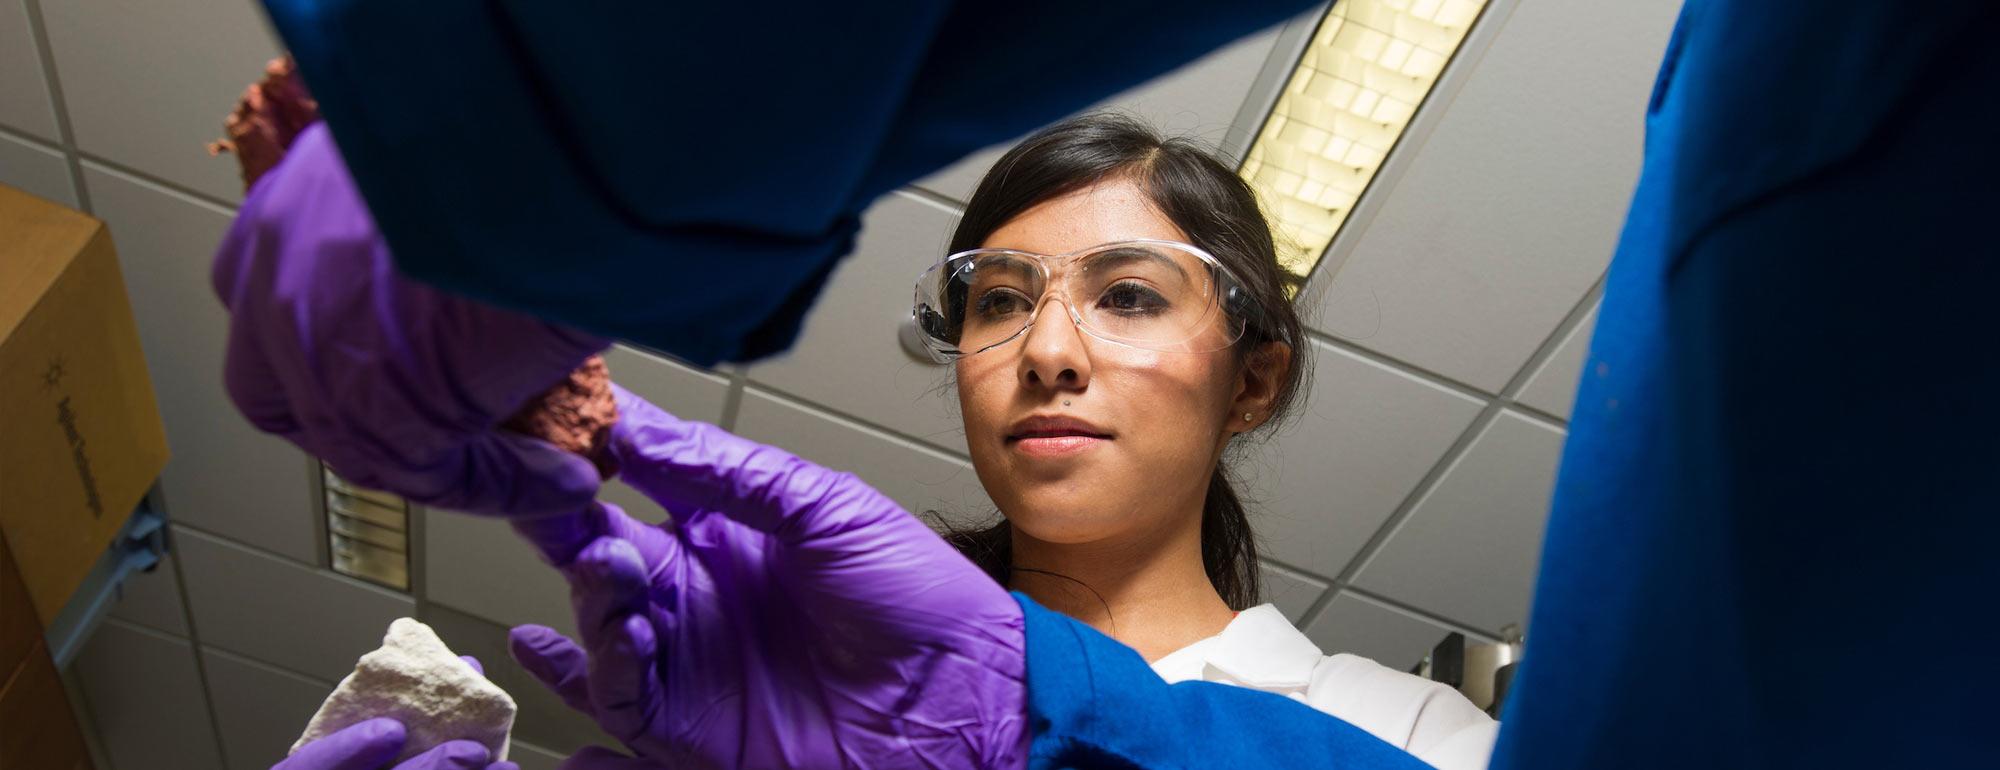 A female student works with a researcher in a lab on the UC Davis campus